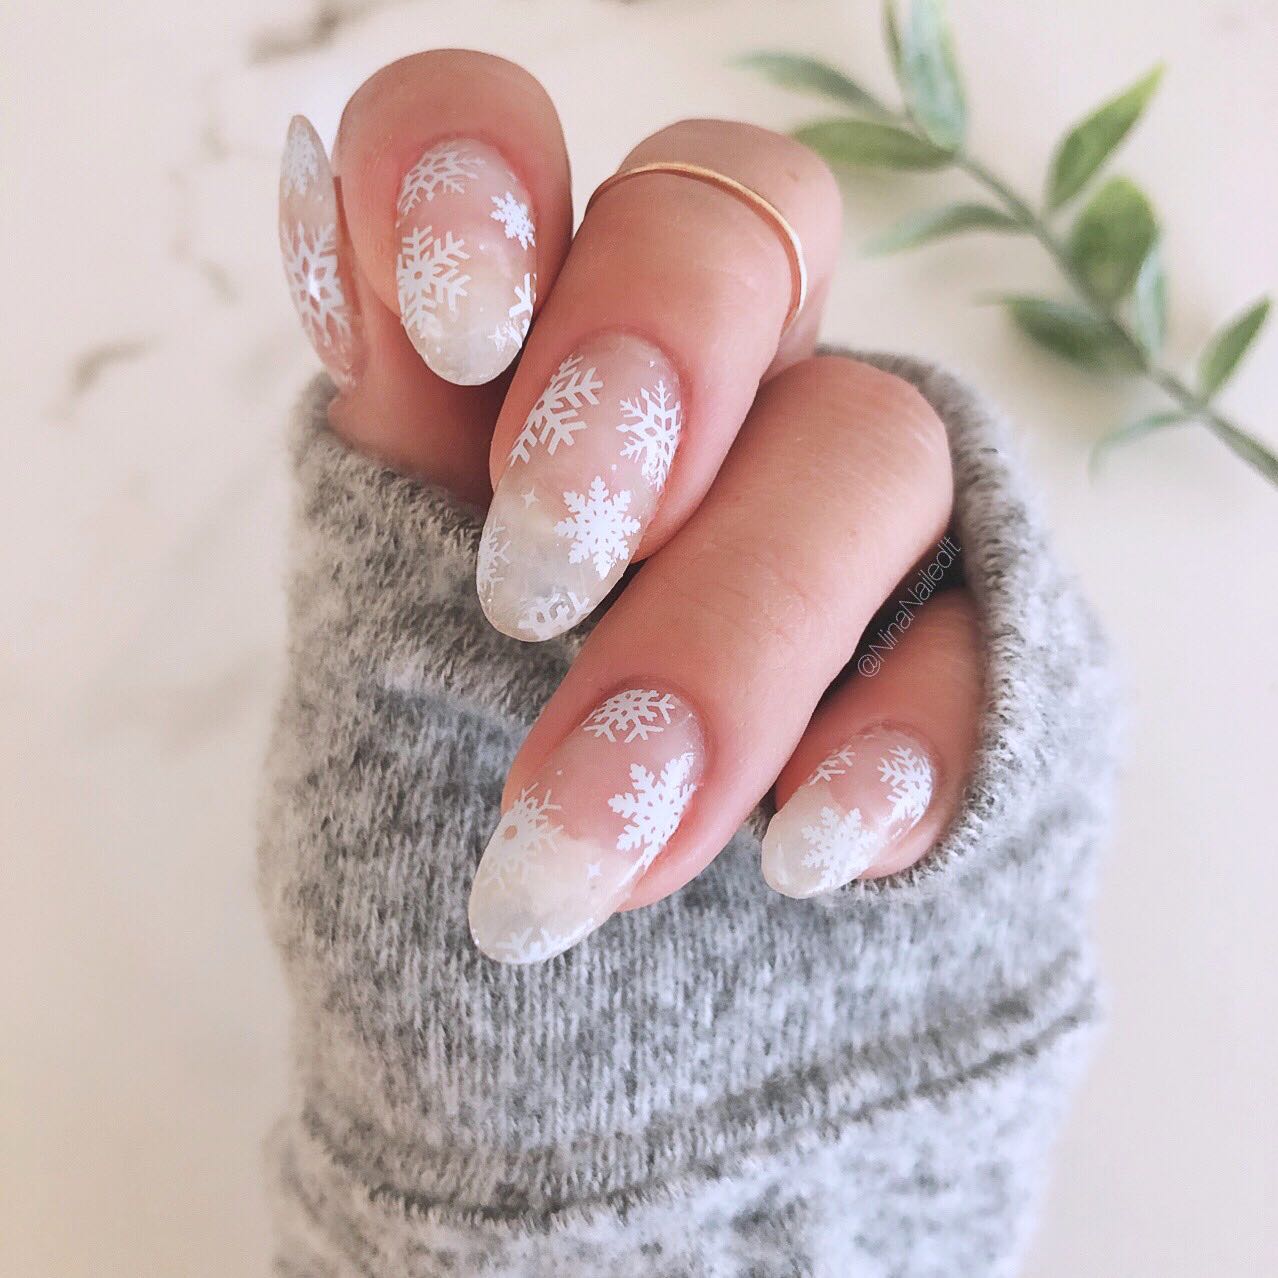 Simple Christmas Nails With Snowflakes